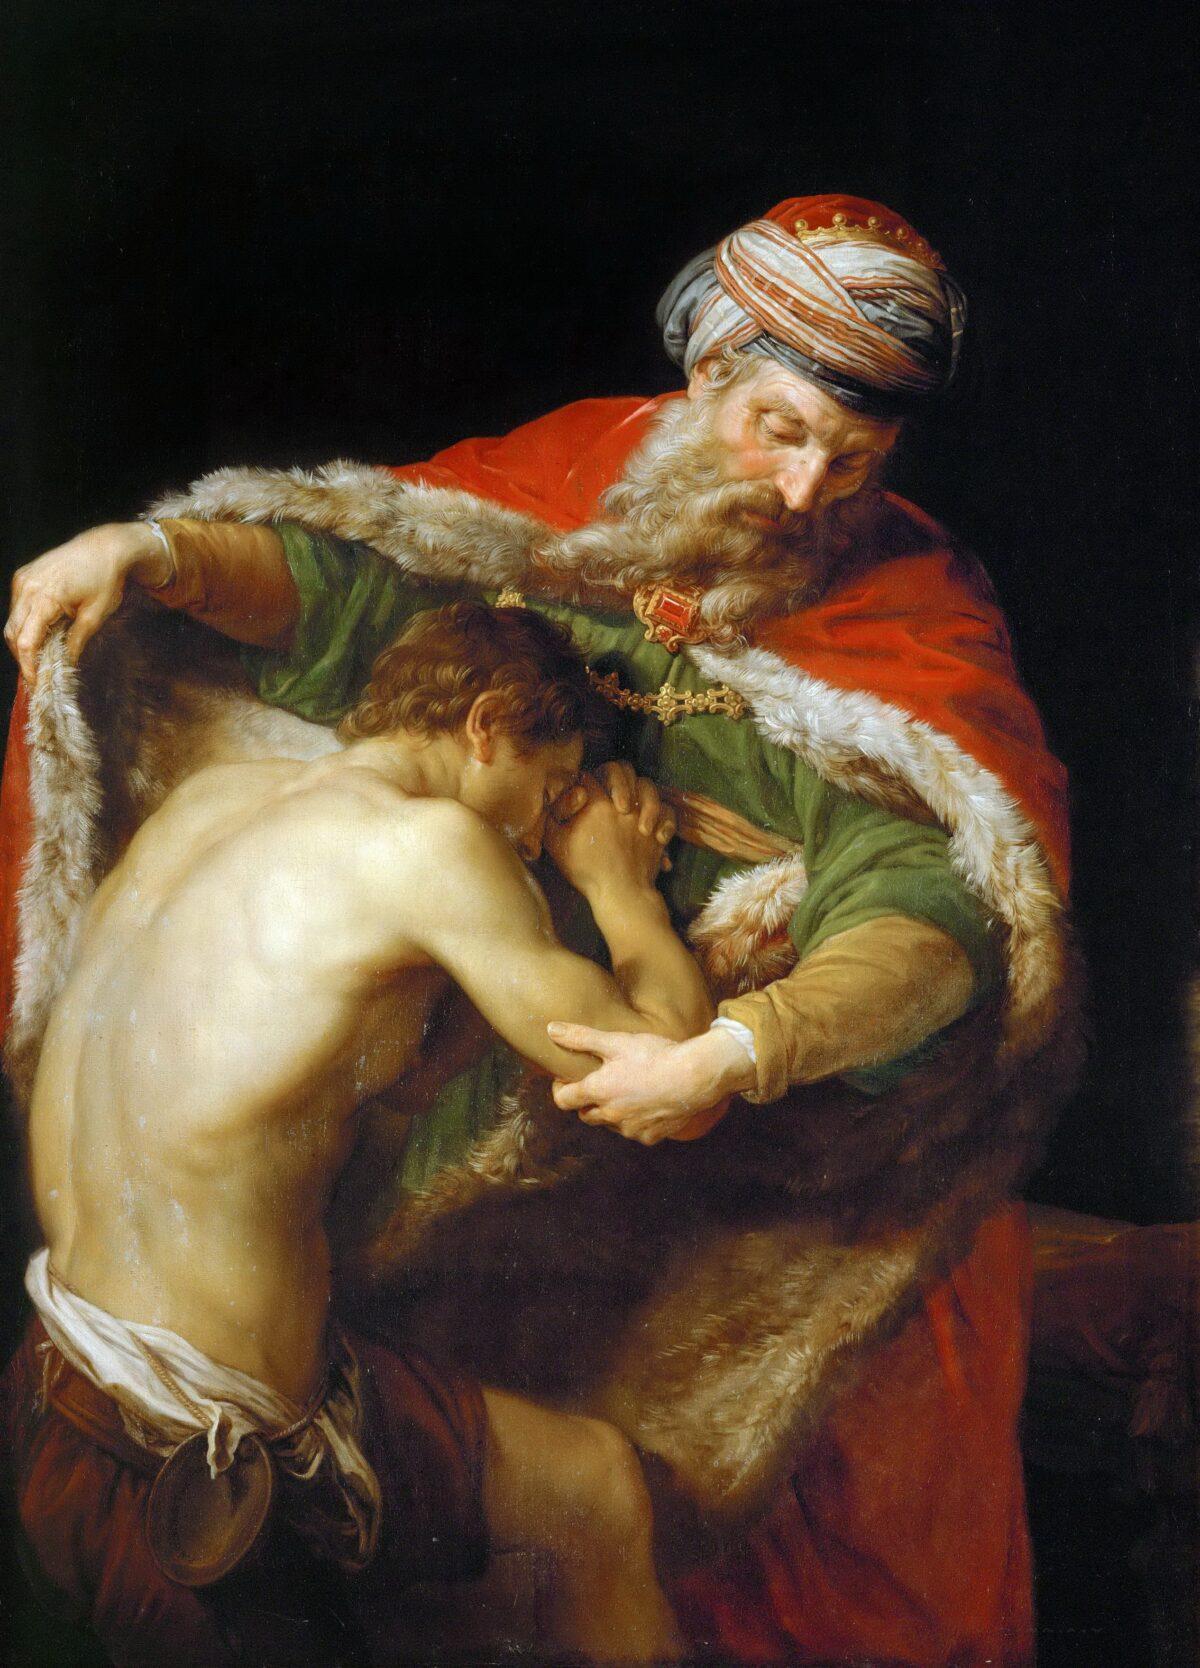 “The Return of the Prodigal Son,” 1773, by Pompeo Batoni. Oil on canvas, 54 inches by 40 inches. Museum of Art History, Vienna, Austria. (Public Domain)